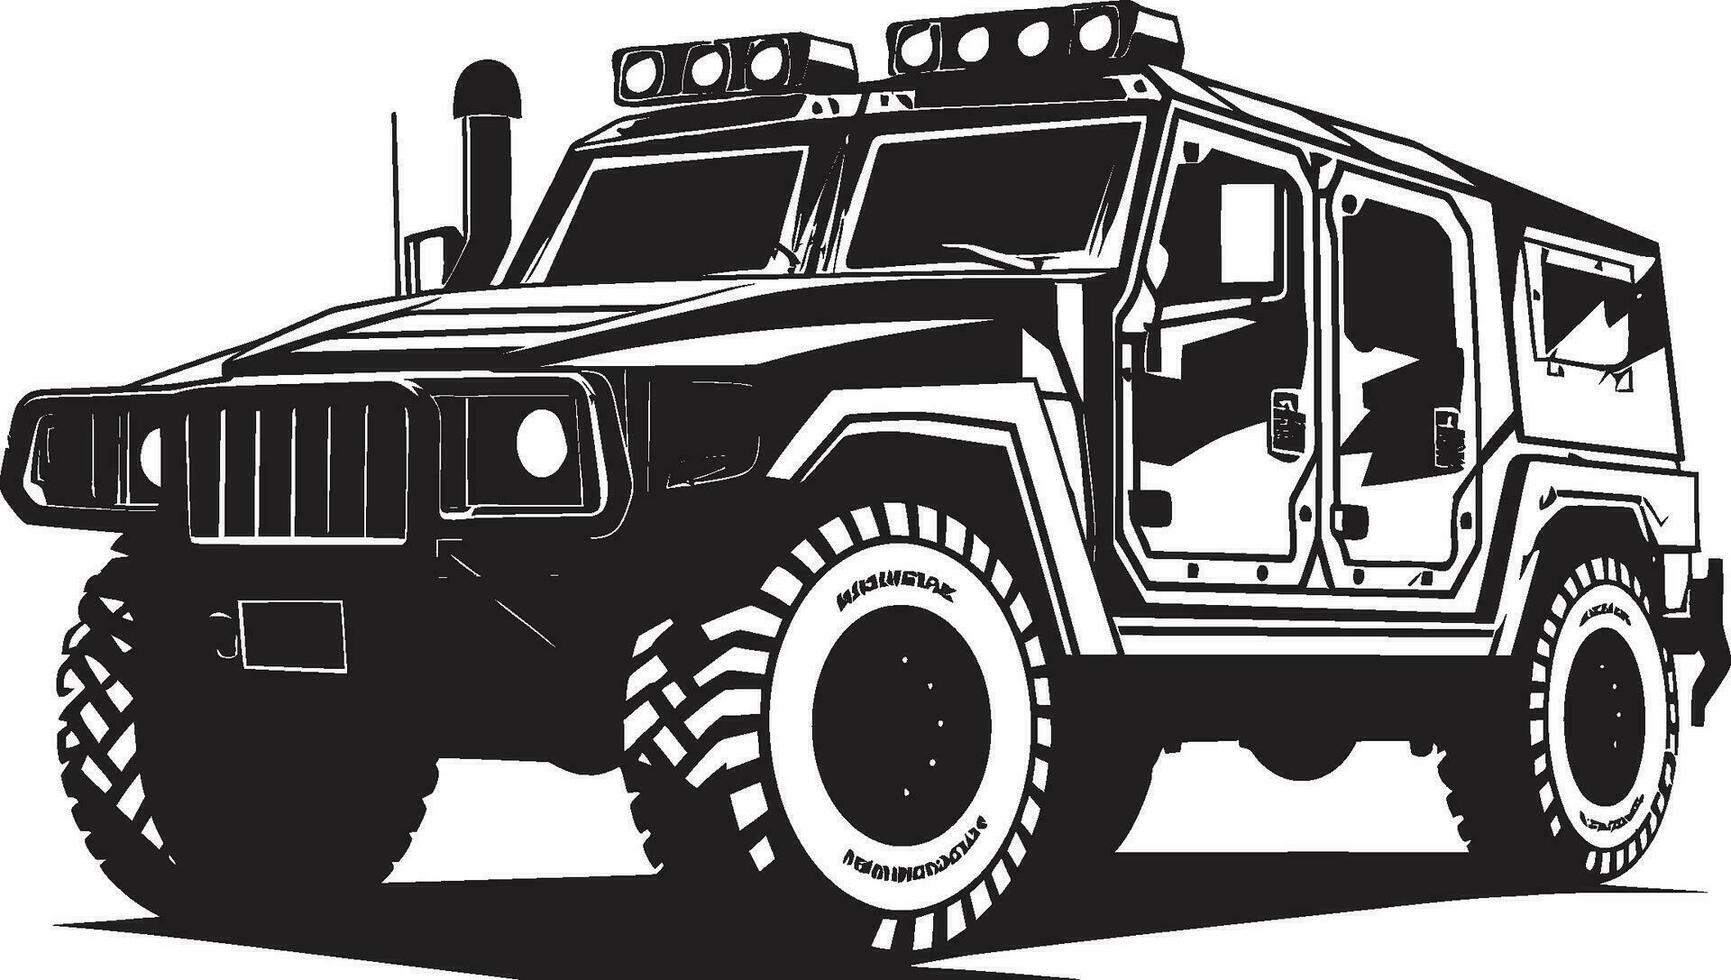 Battle Ready Expedition 4x4 Black Logo Defensive Recon Military Vehicle Vector Design